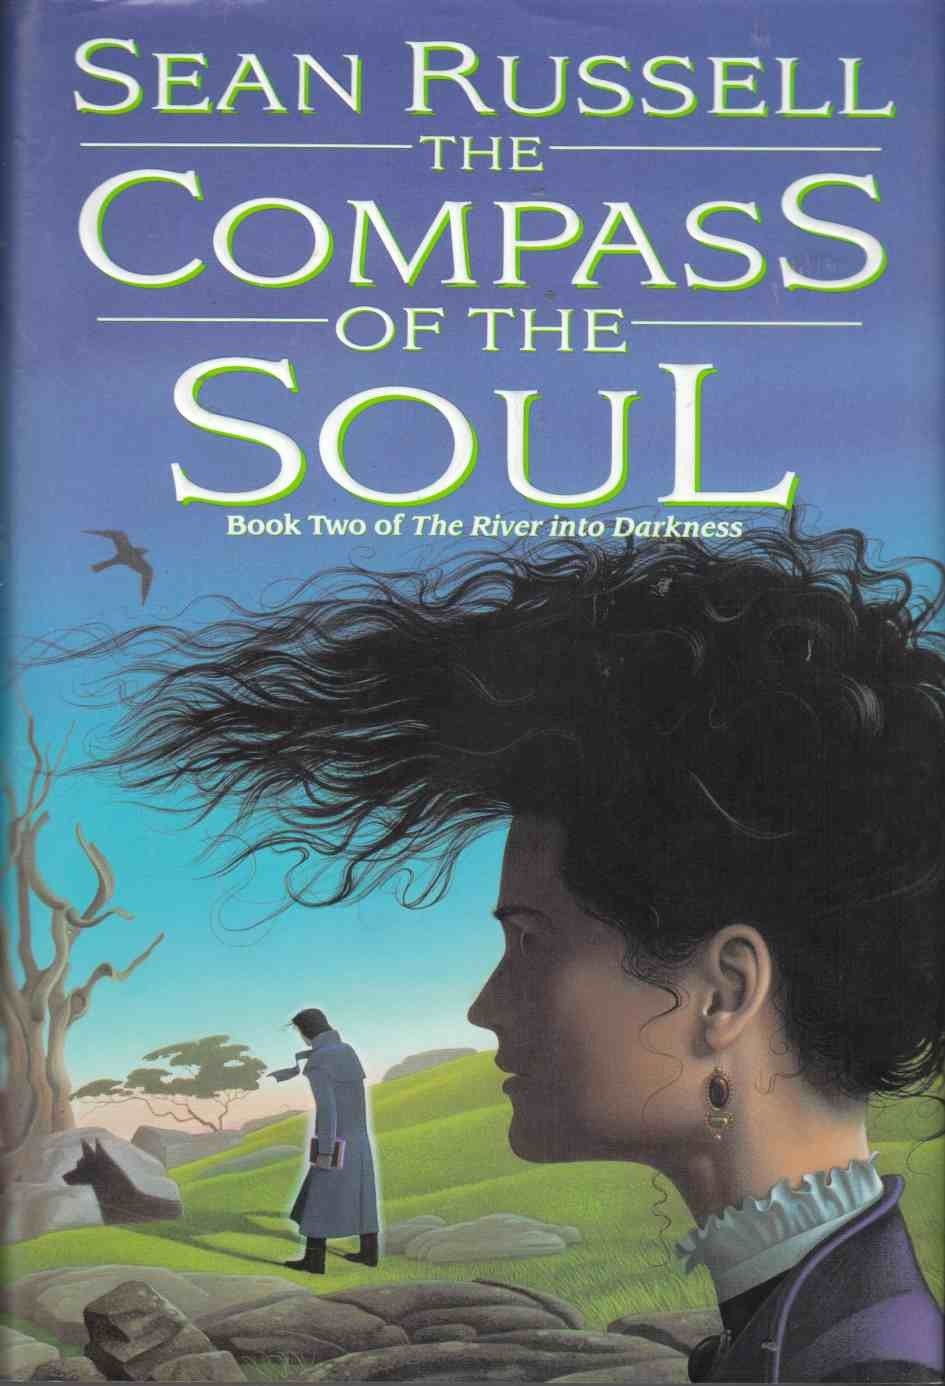 Compass of the Soul